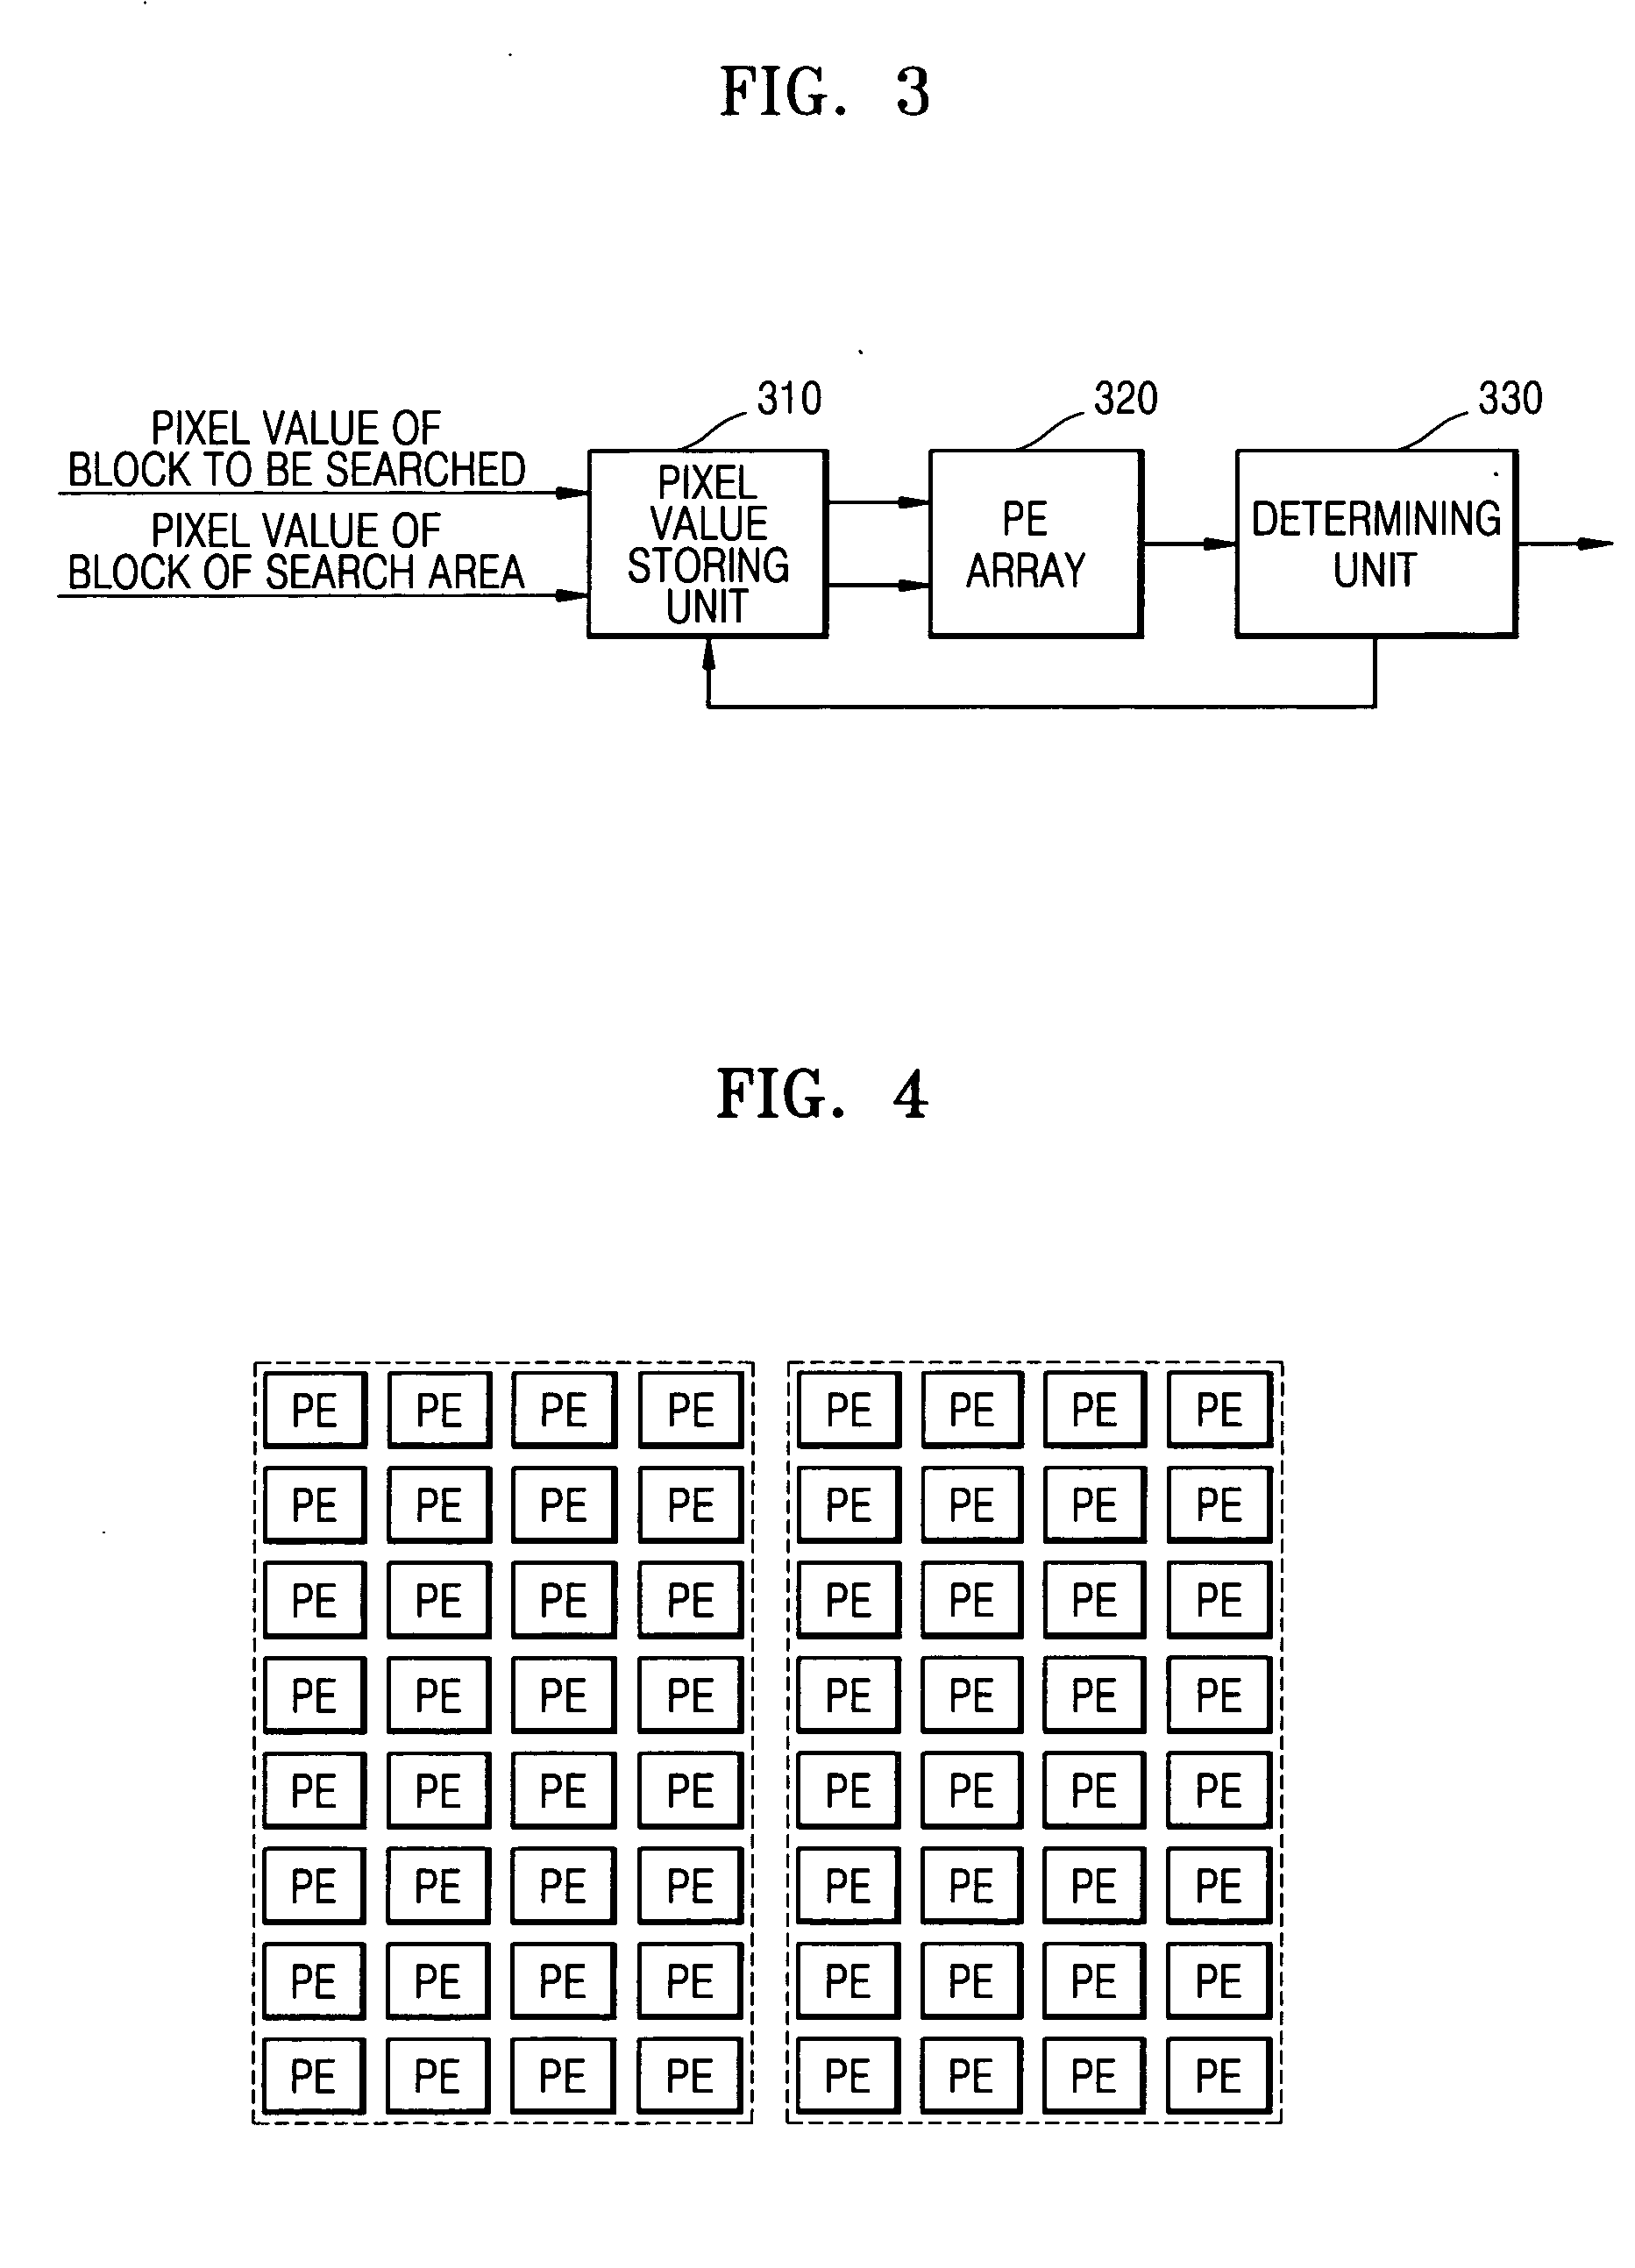 Method and apparatus for sub-pixel motion estimation which reduces bit precision